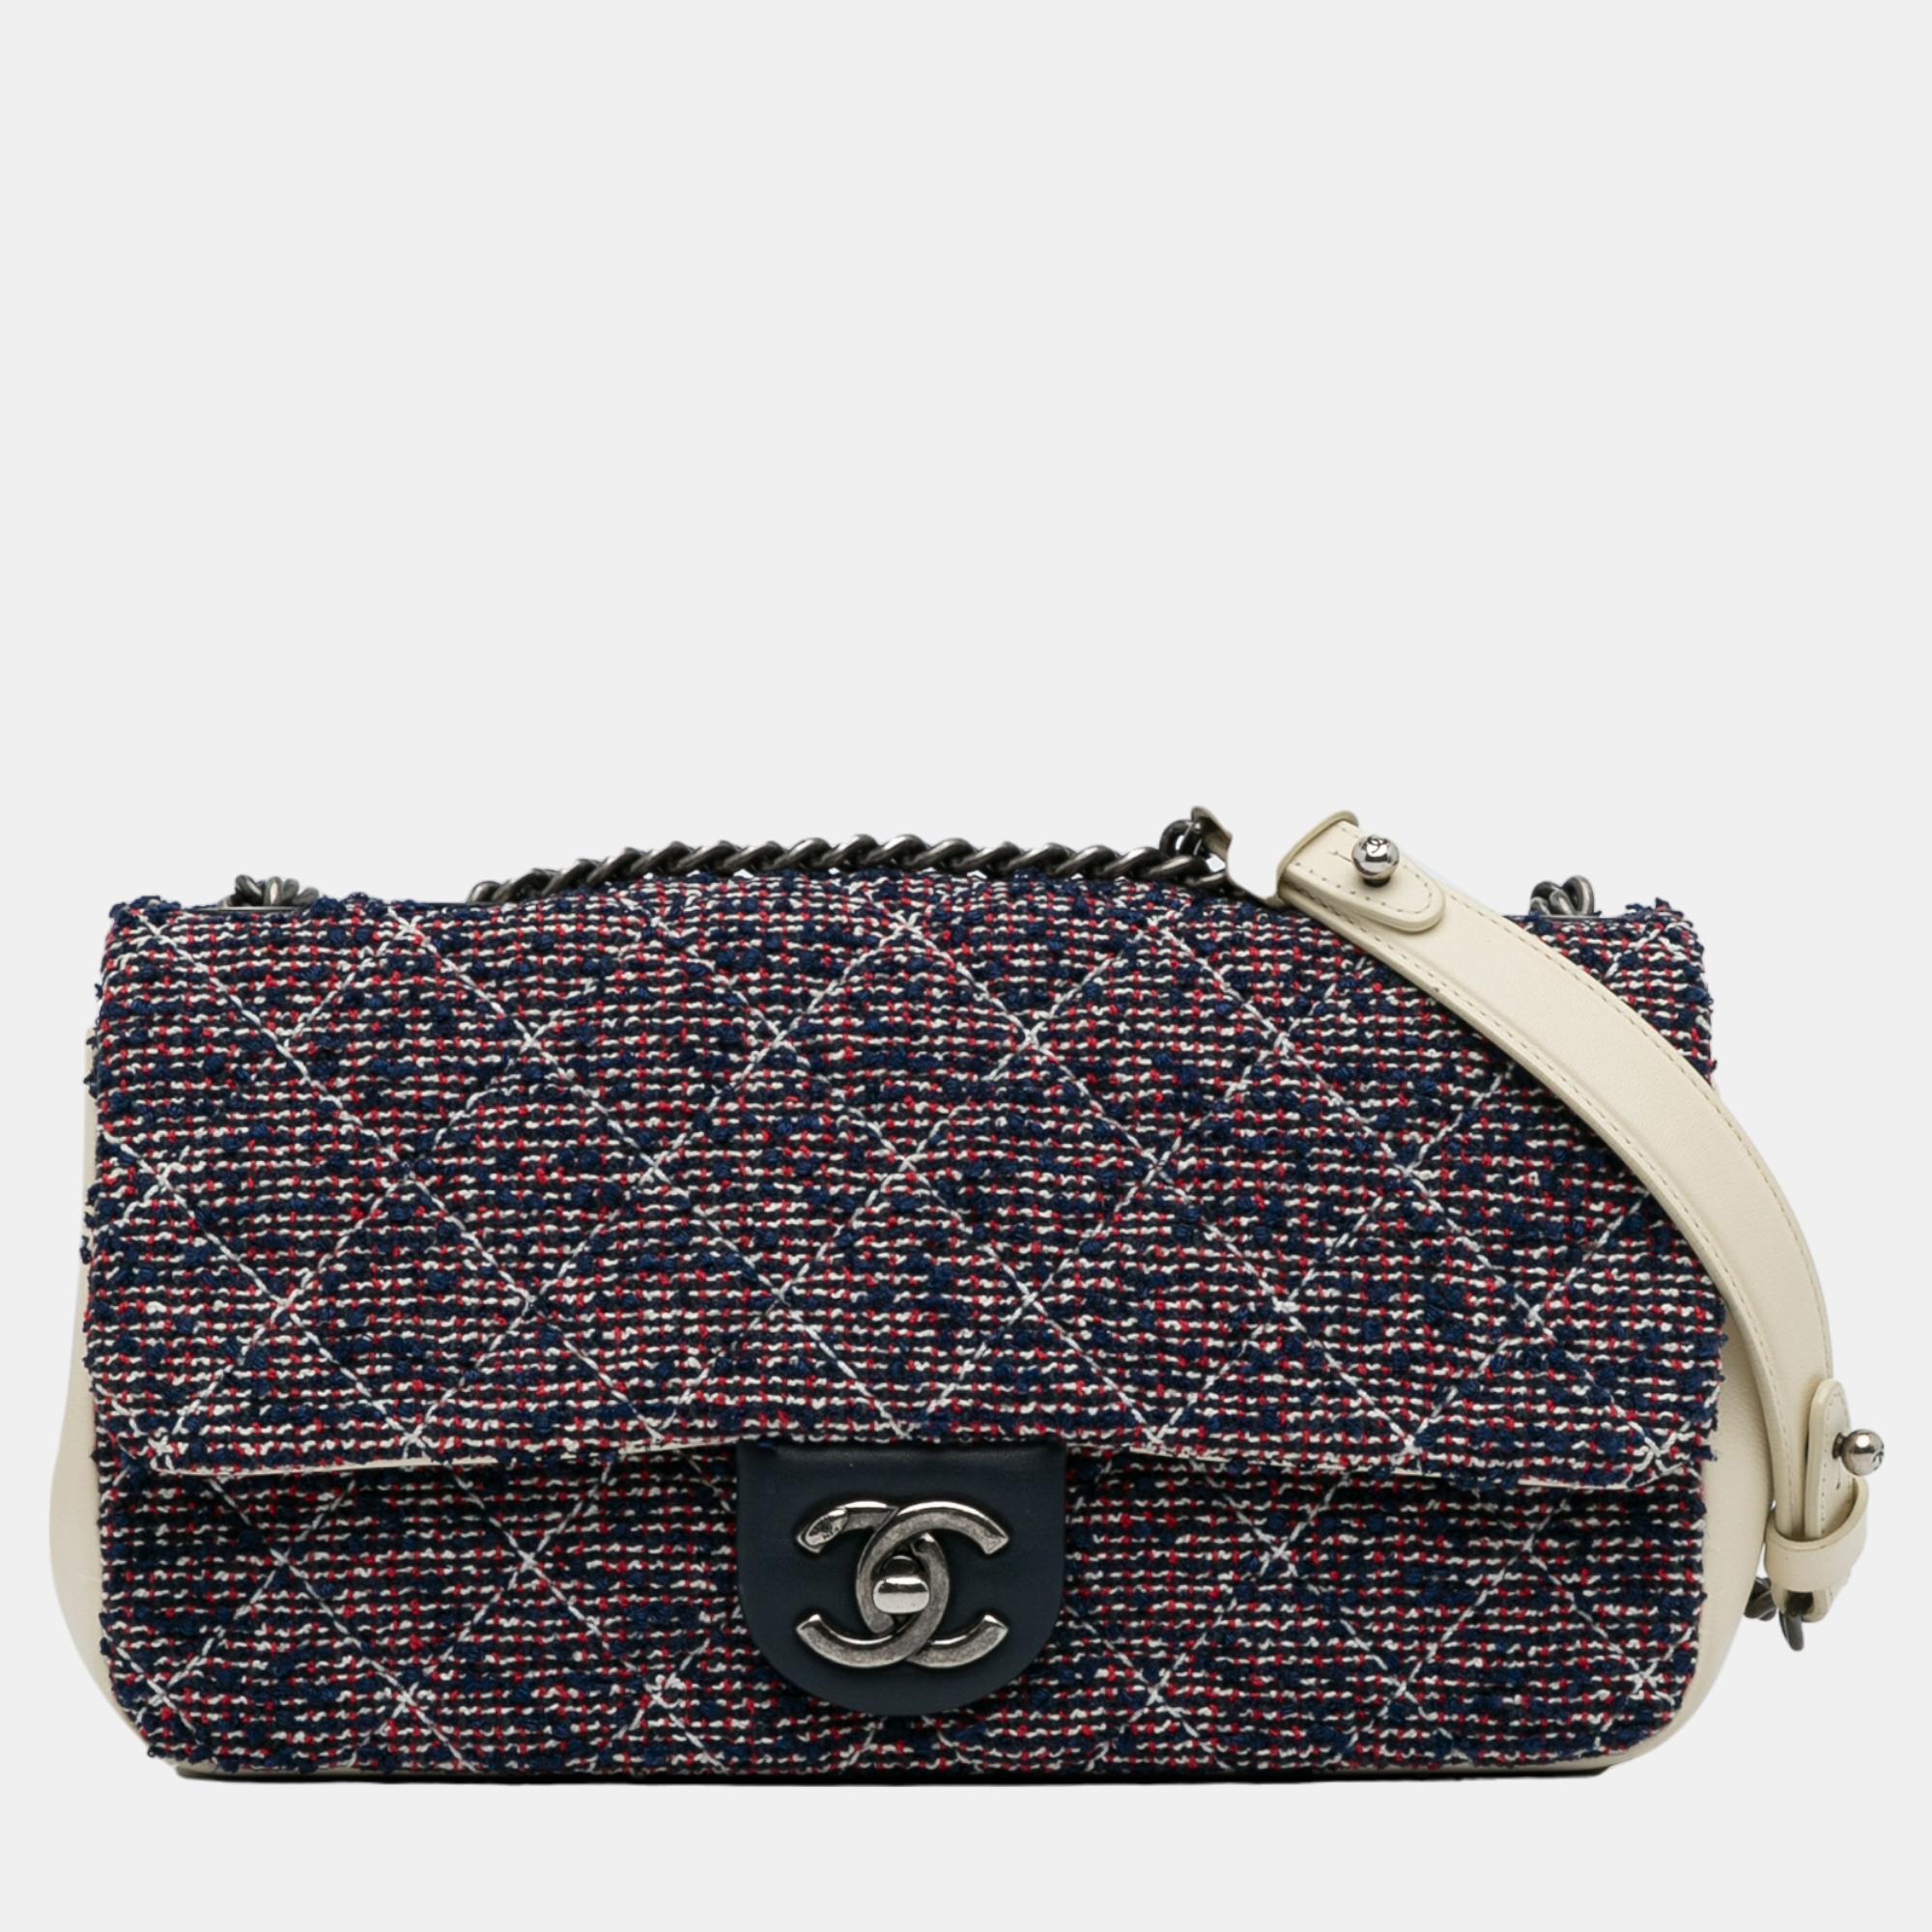 Chanel blue small classic tweed flap bag